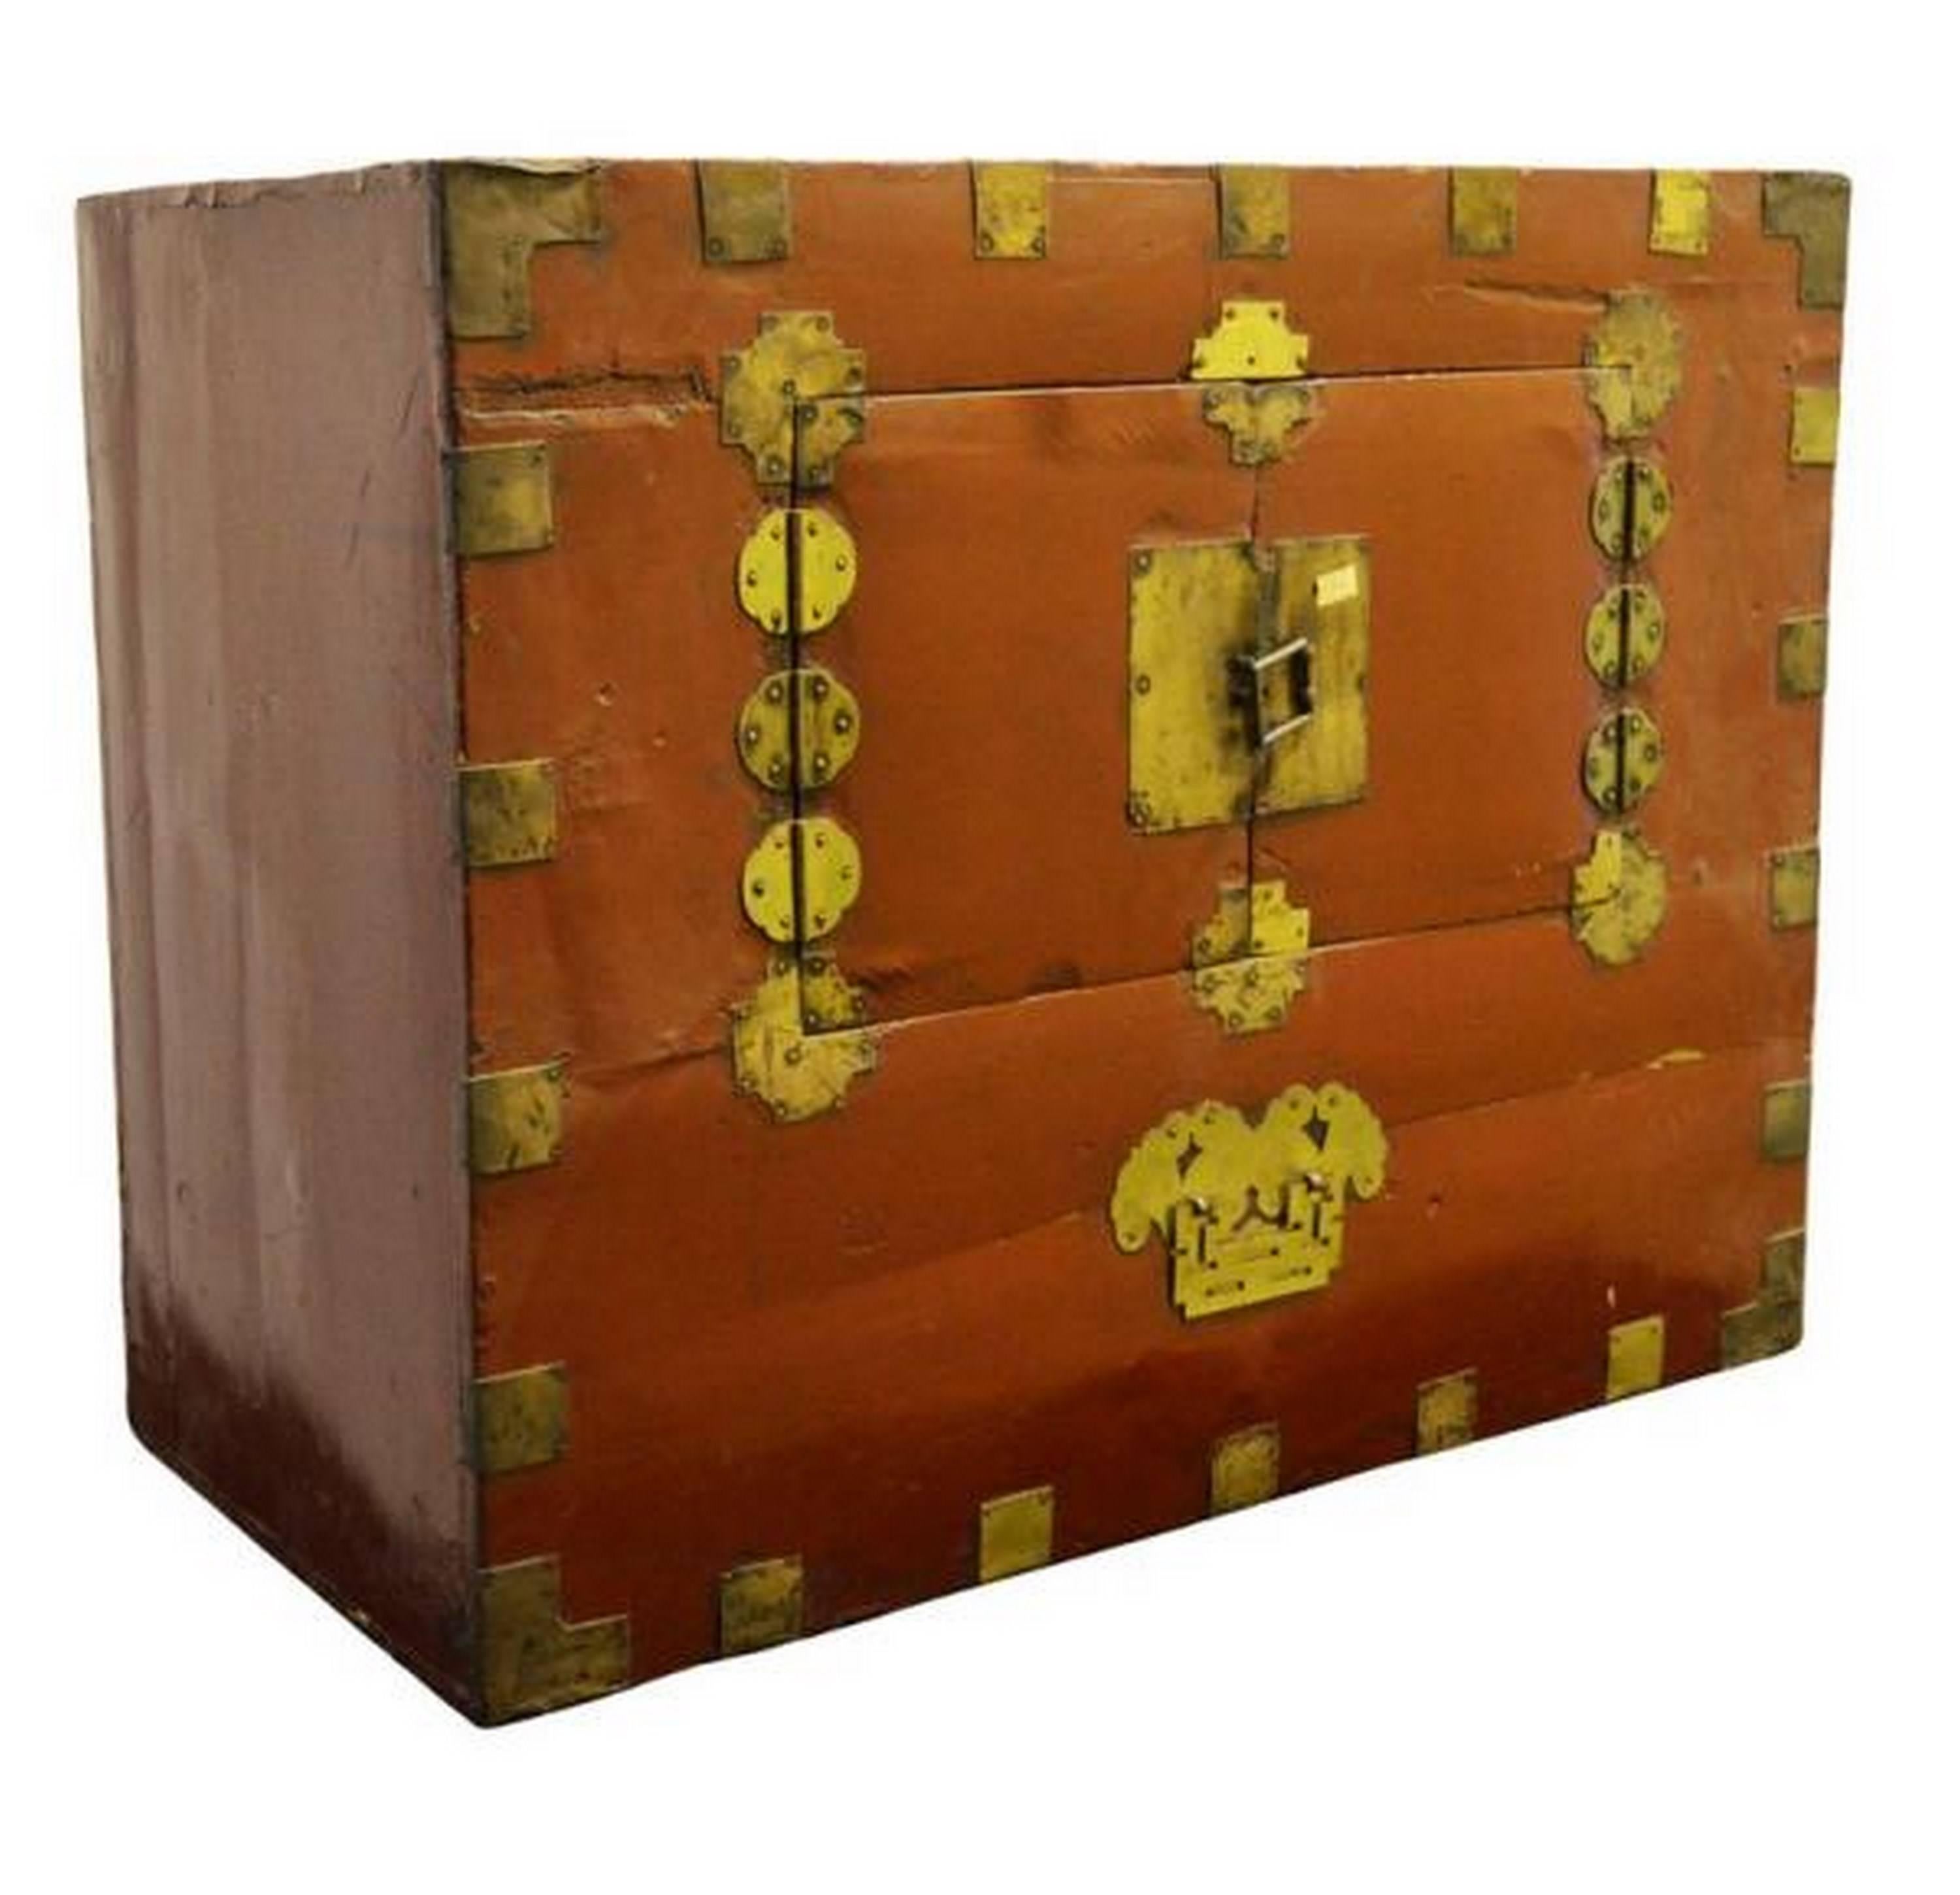 This Korean chest from the early 20th century displays a nicely varnished wood panel, adorned on its front with traditional brass hardware. The chest opens thanks to a double door with hinges that are also splendidly carved brass. Under the lock